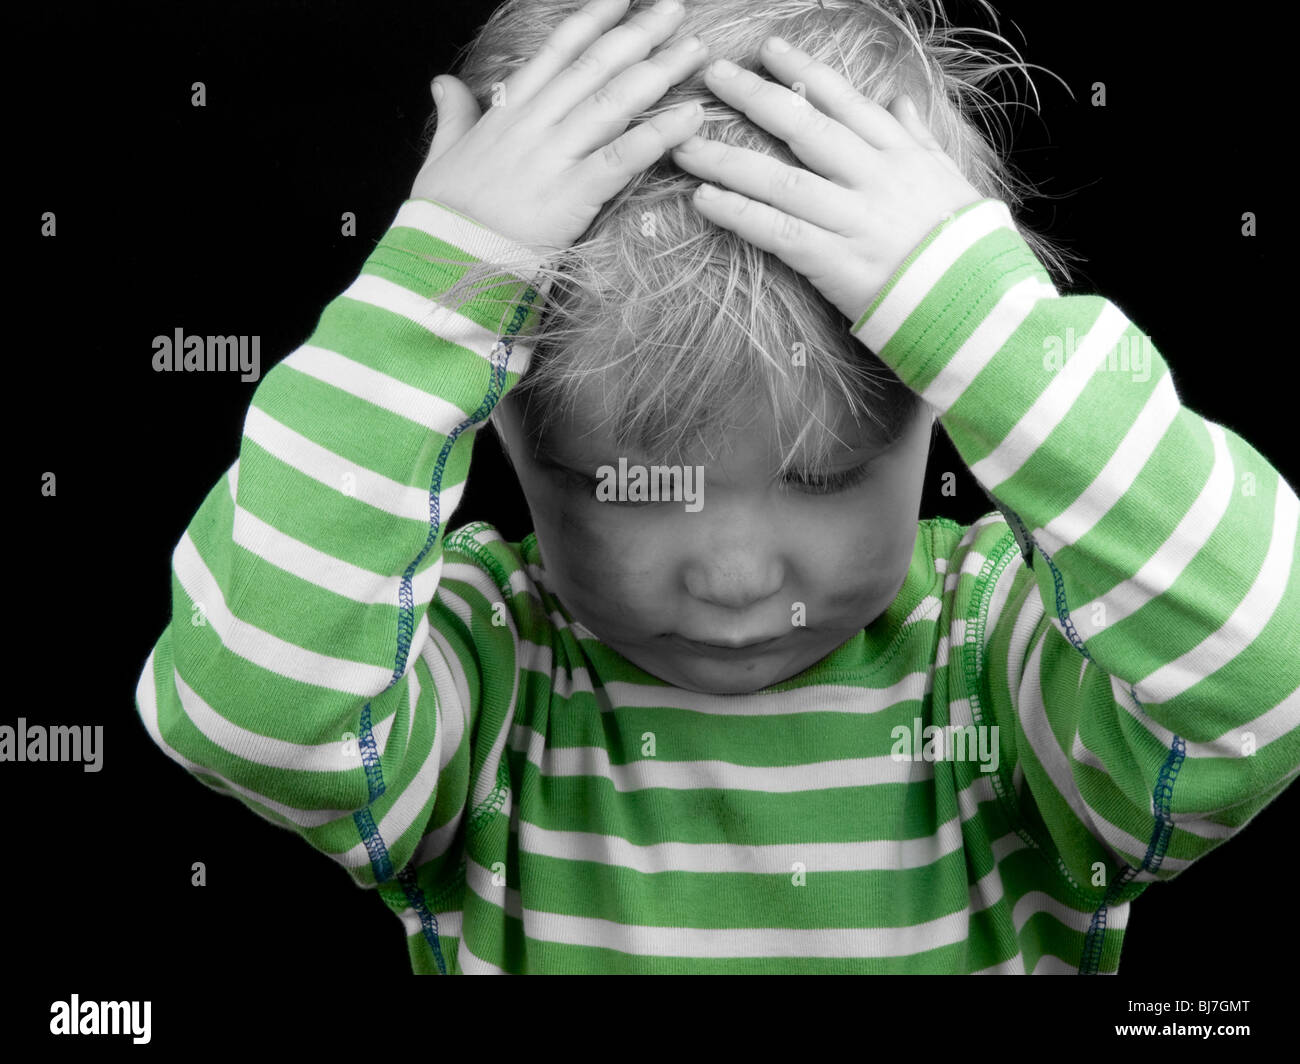 Little boy with hands on his head on black background. Monochrome picture with only color green Stock Photo